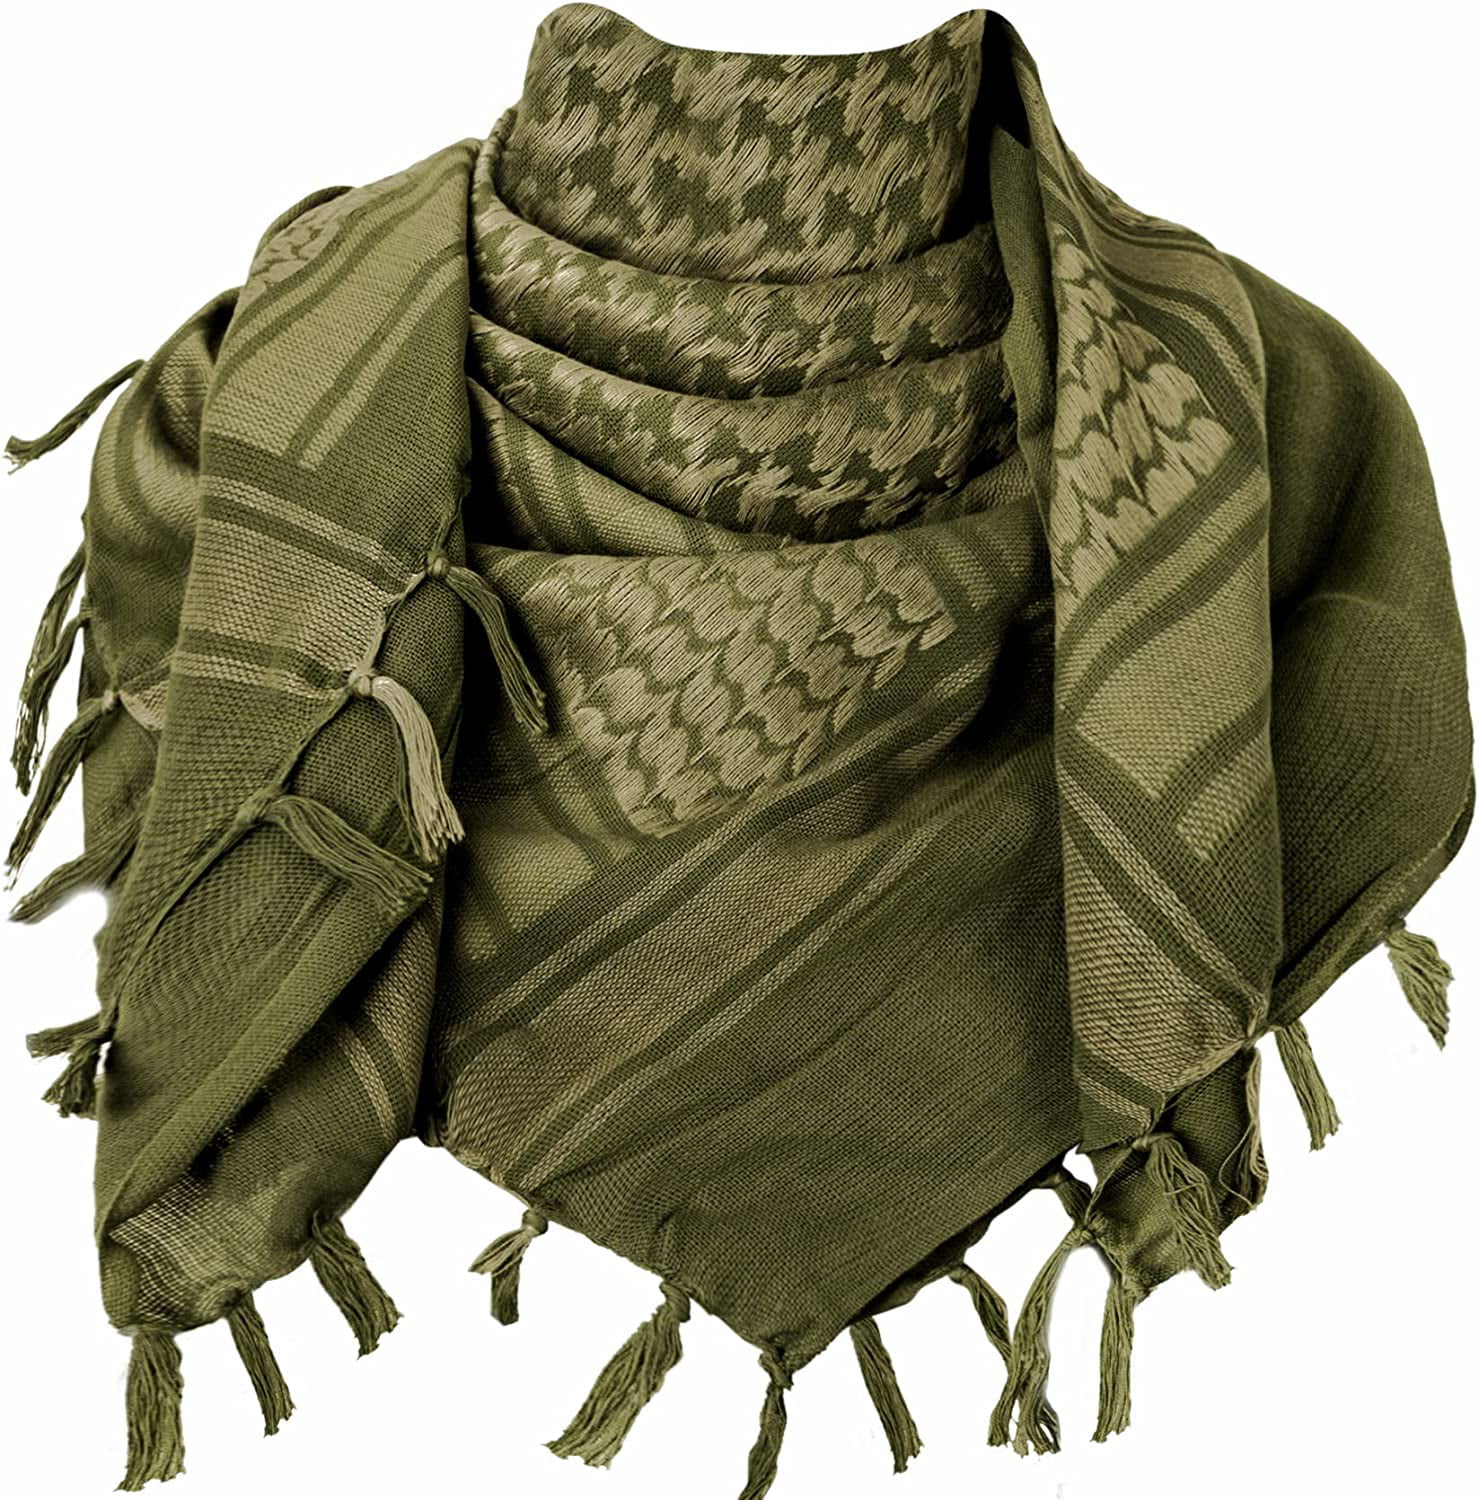 Warranty and FREE shipping Global Featured Shemagh tactical Scarf with ...